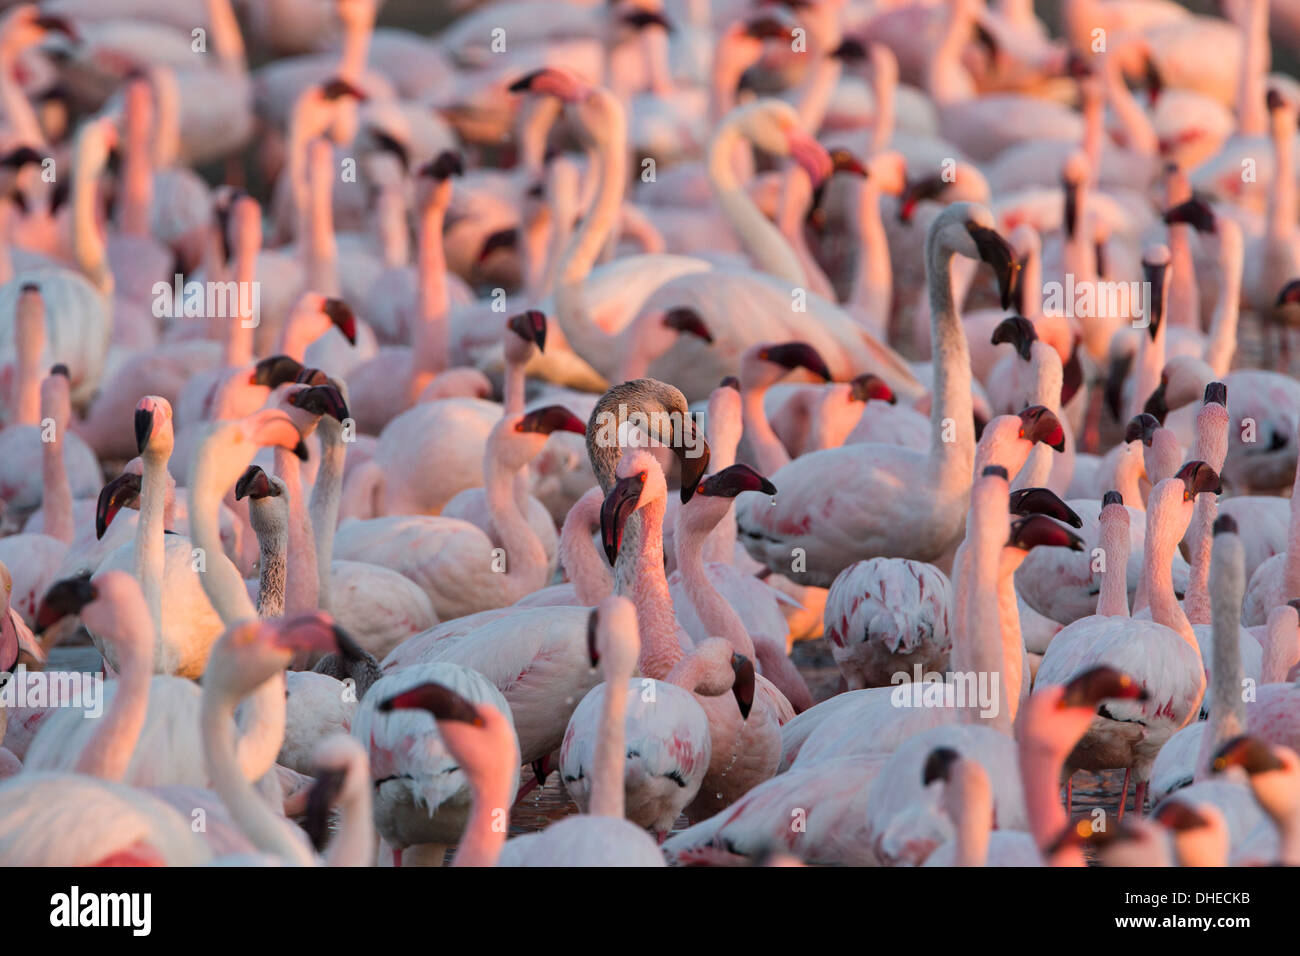 Greater flamingoes (Phoenicopterus ruber) and Lesser flamingoes (Phoenicopterus minor), Walvis Bay, Namibia, Africa Stock Photo